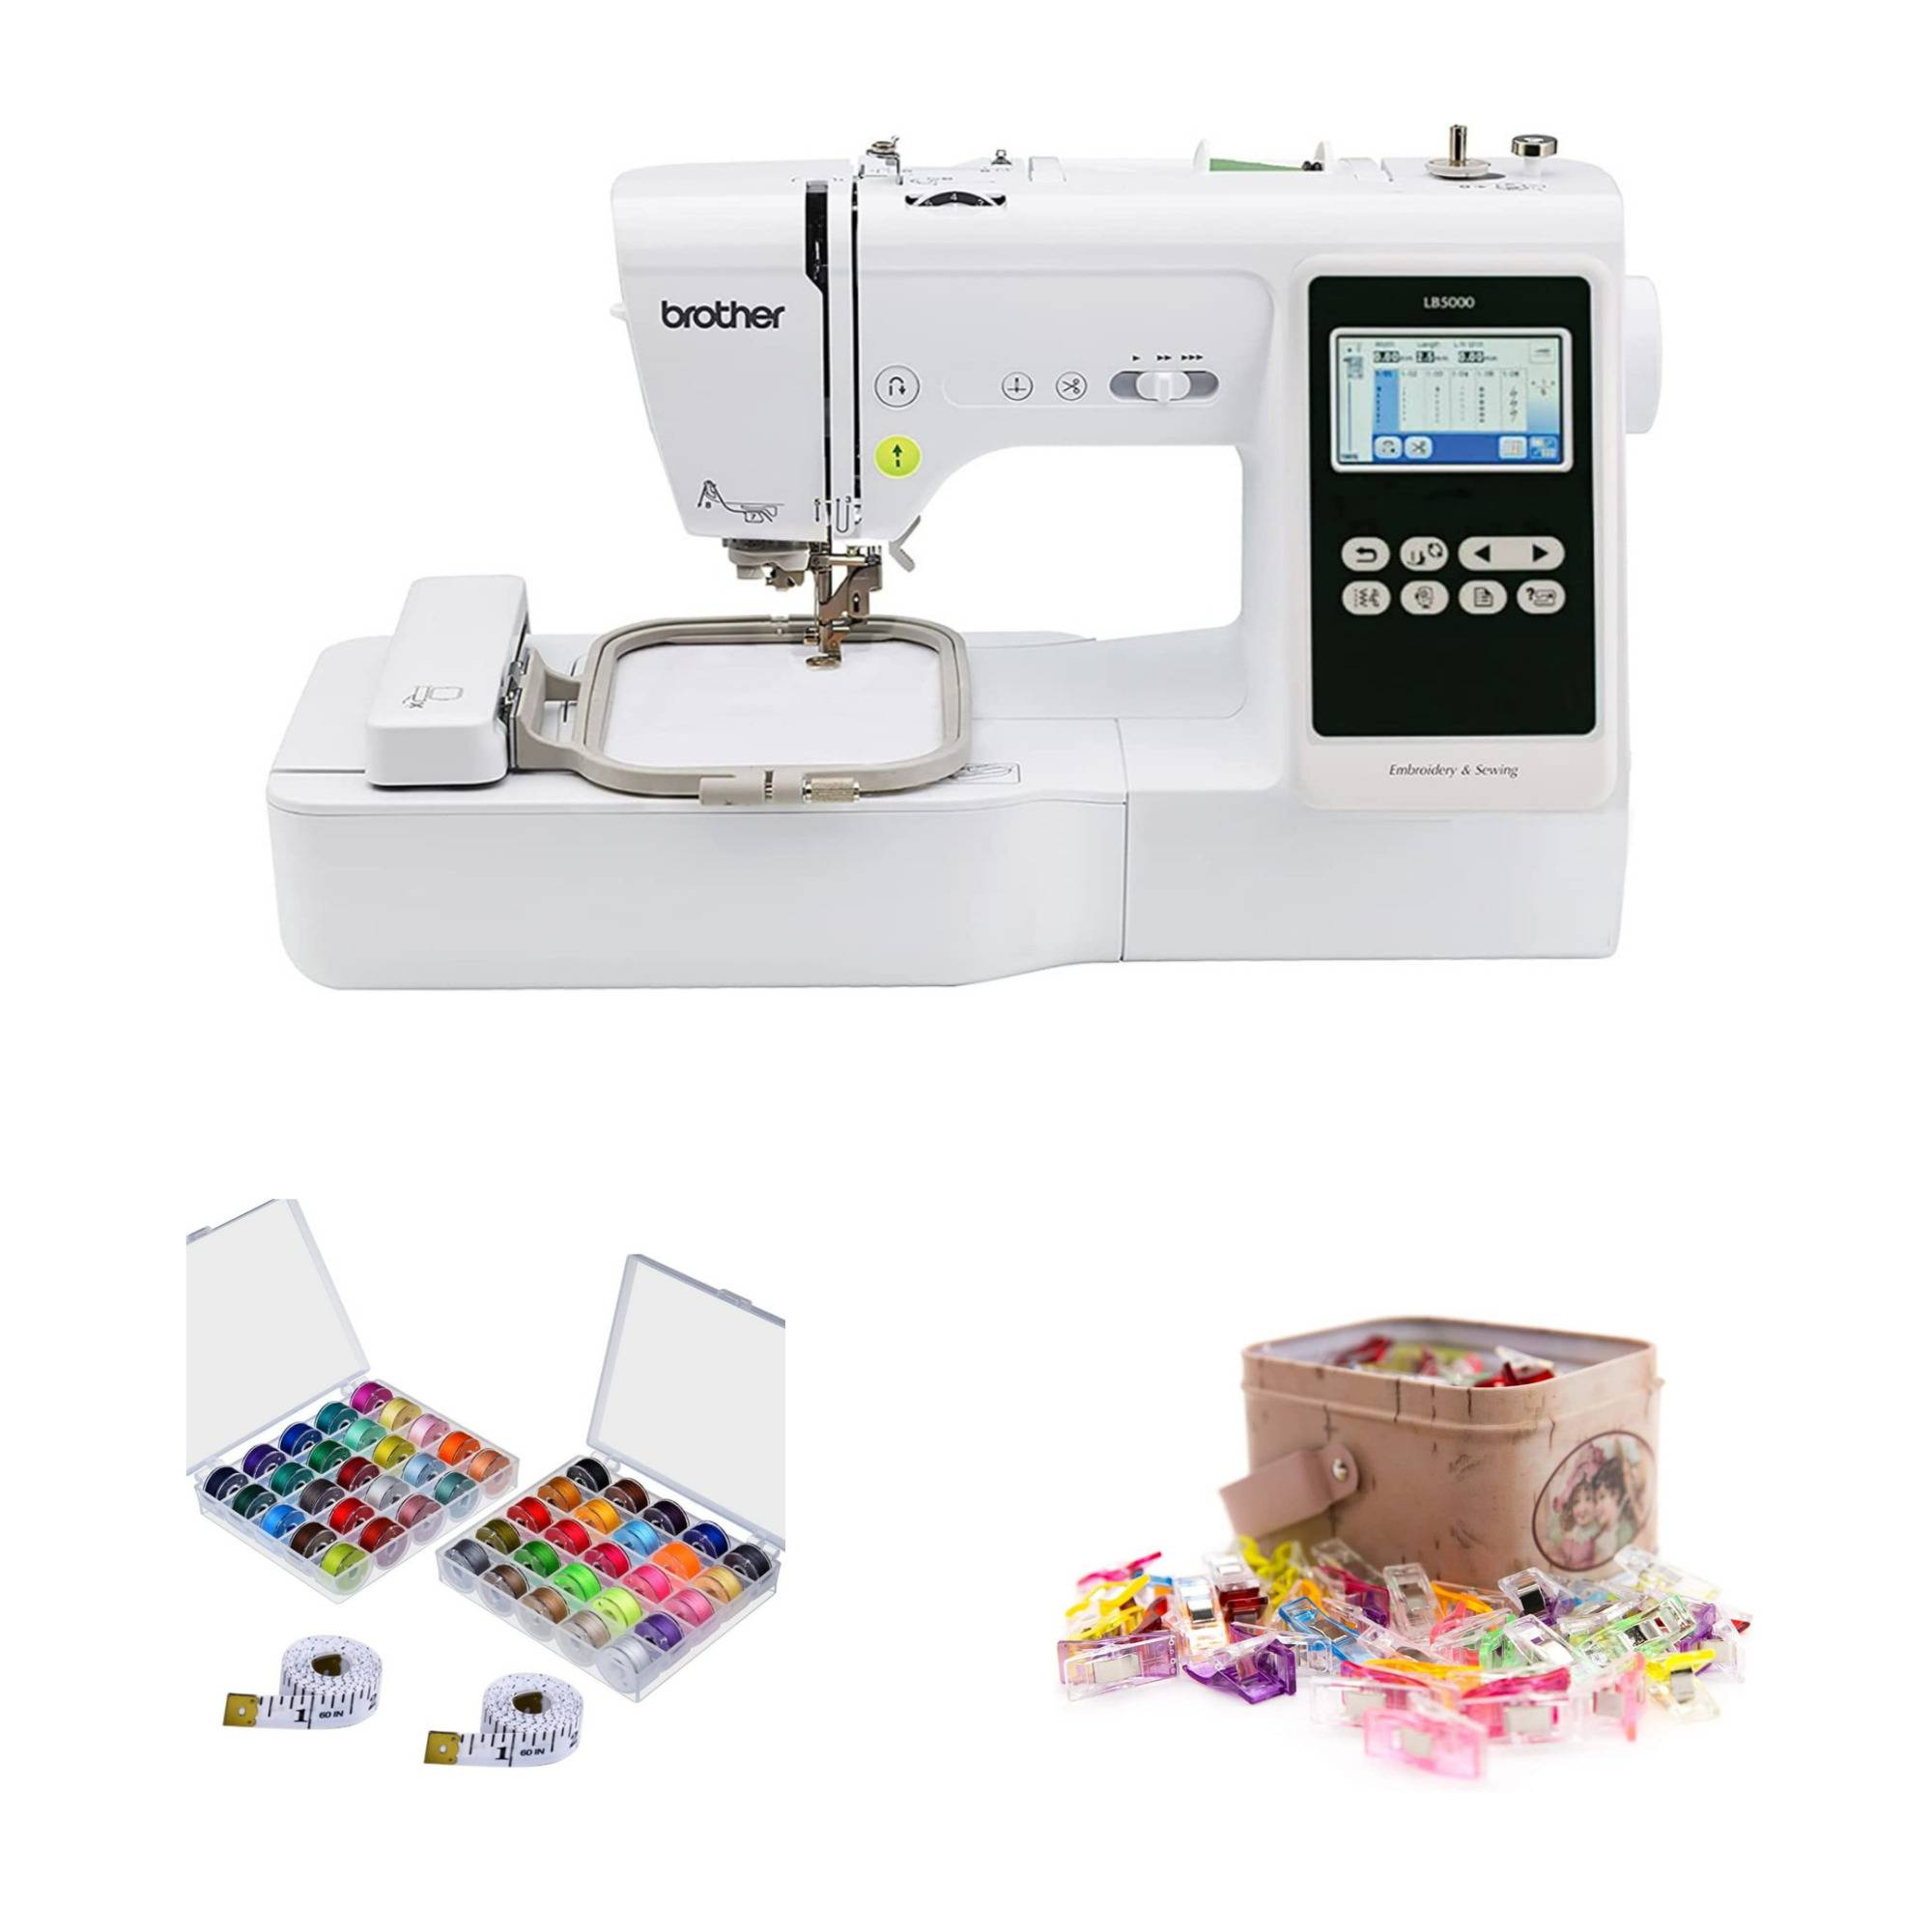 Brother LB5000 Computerized Sewing and Embroidery Machine with LCD Display with Sewing Bundle